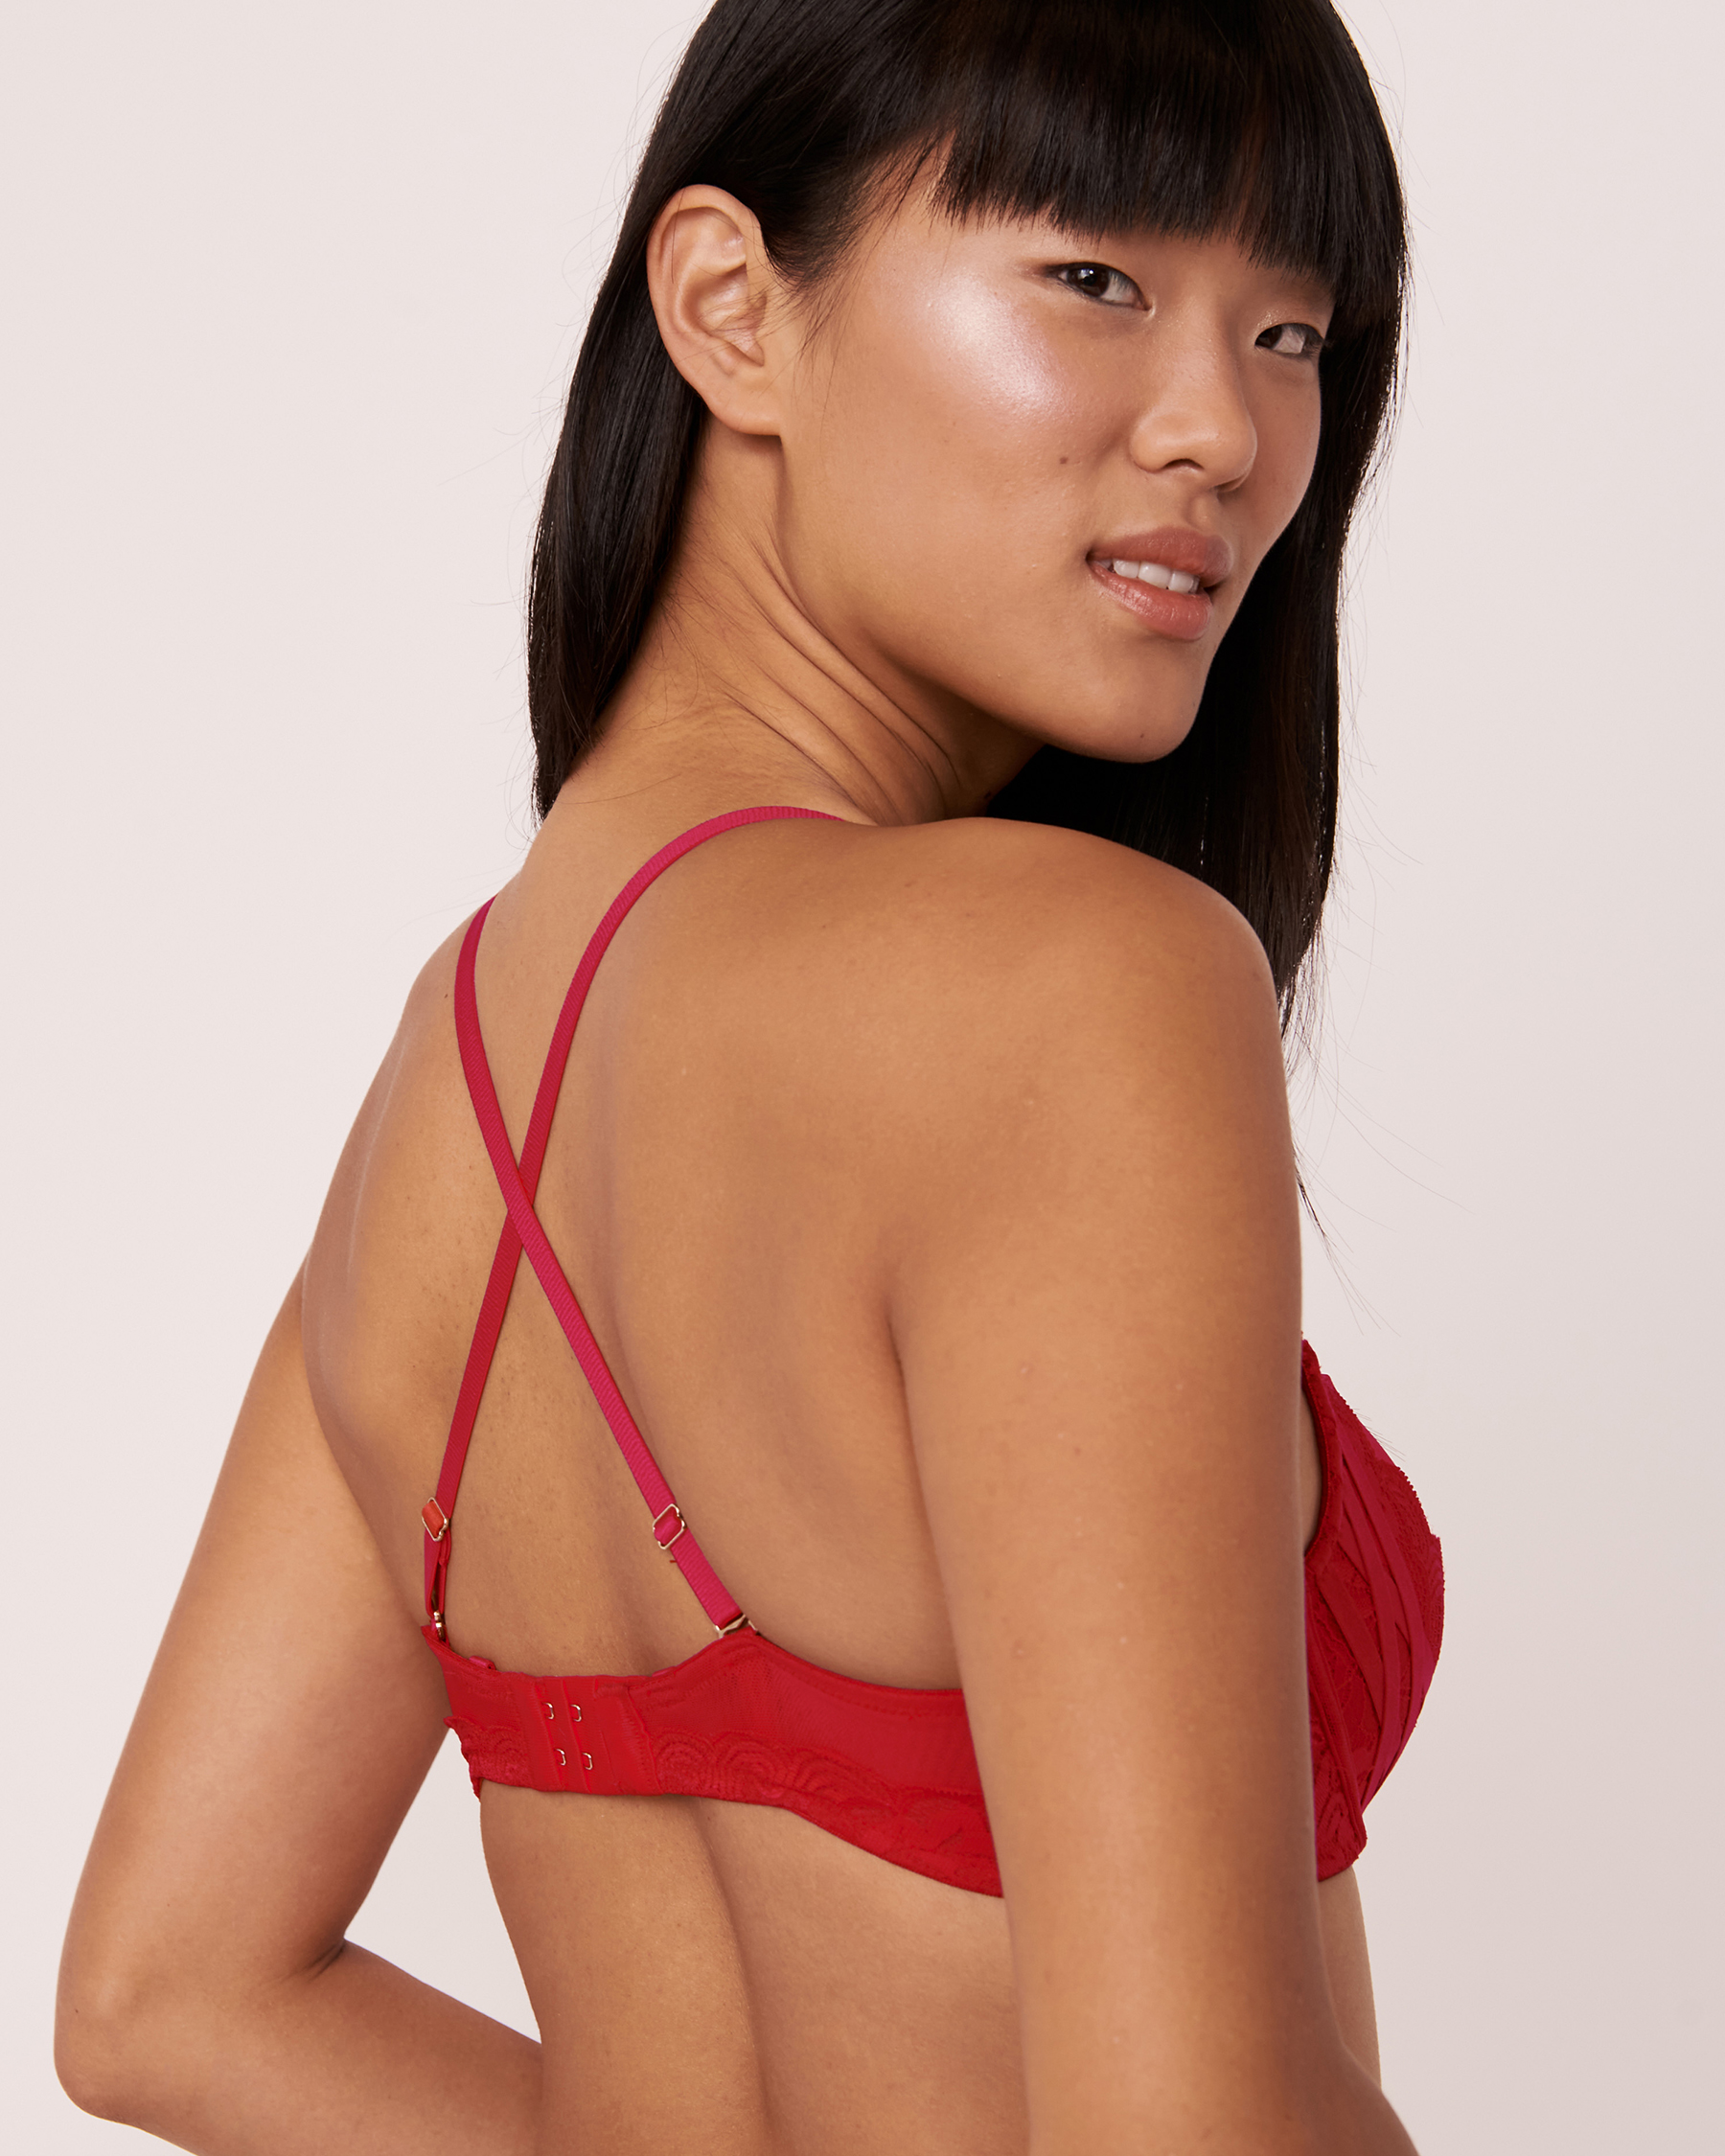 Peony Lace Full Cup Bra - Savvy Red